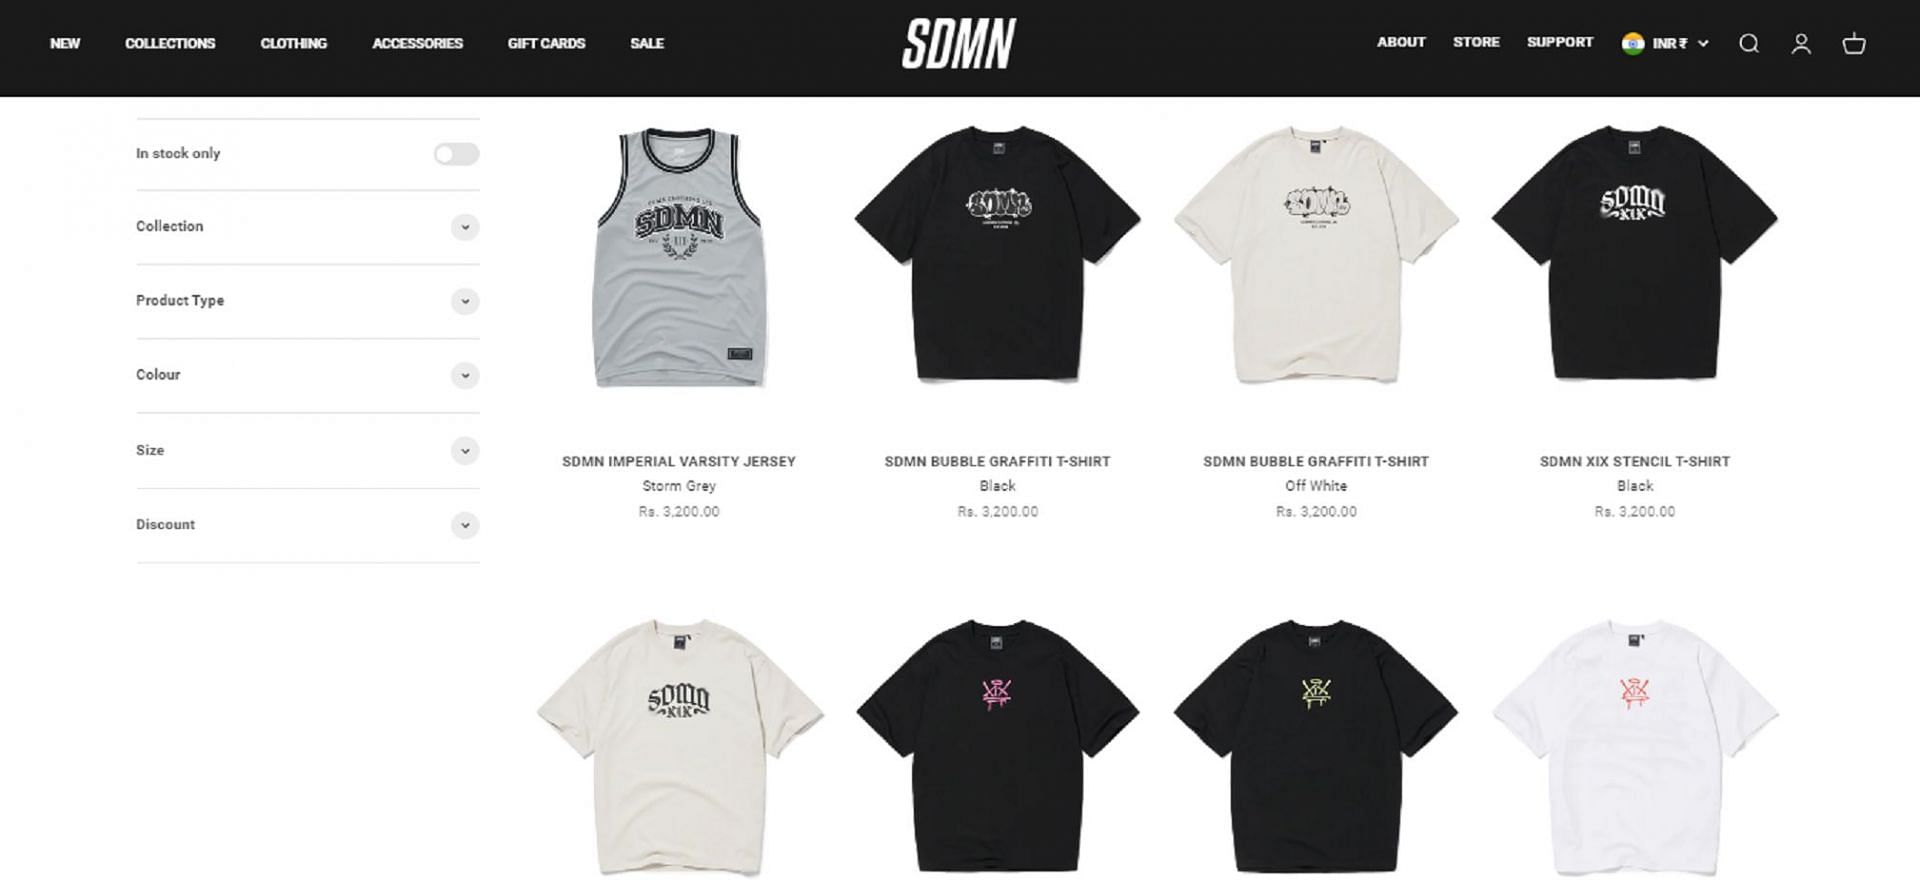 The group has its own clothing brand (Image via sidemenclothing.com)